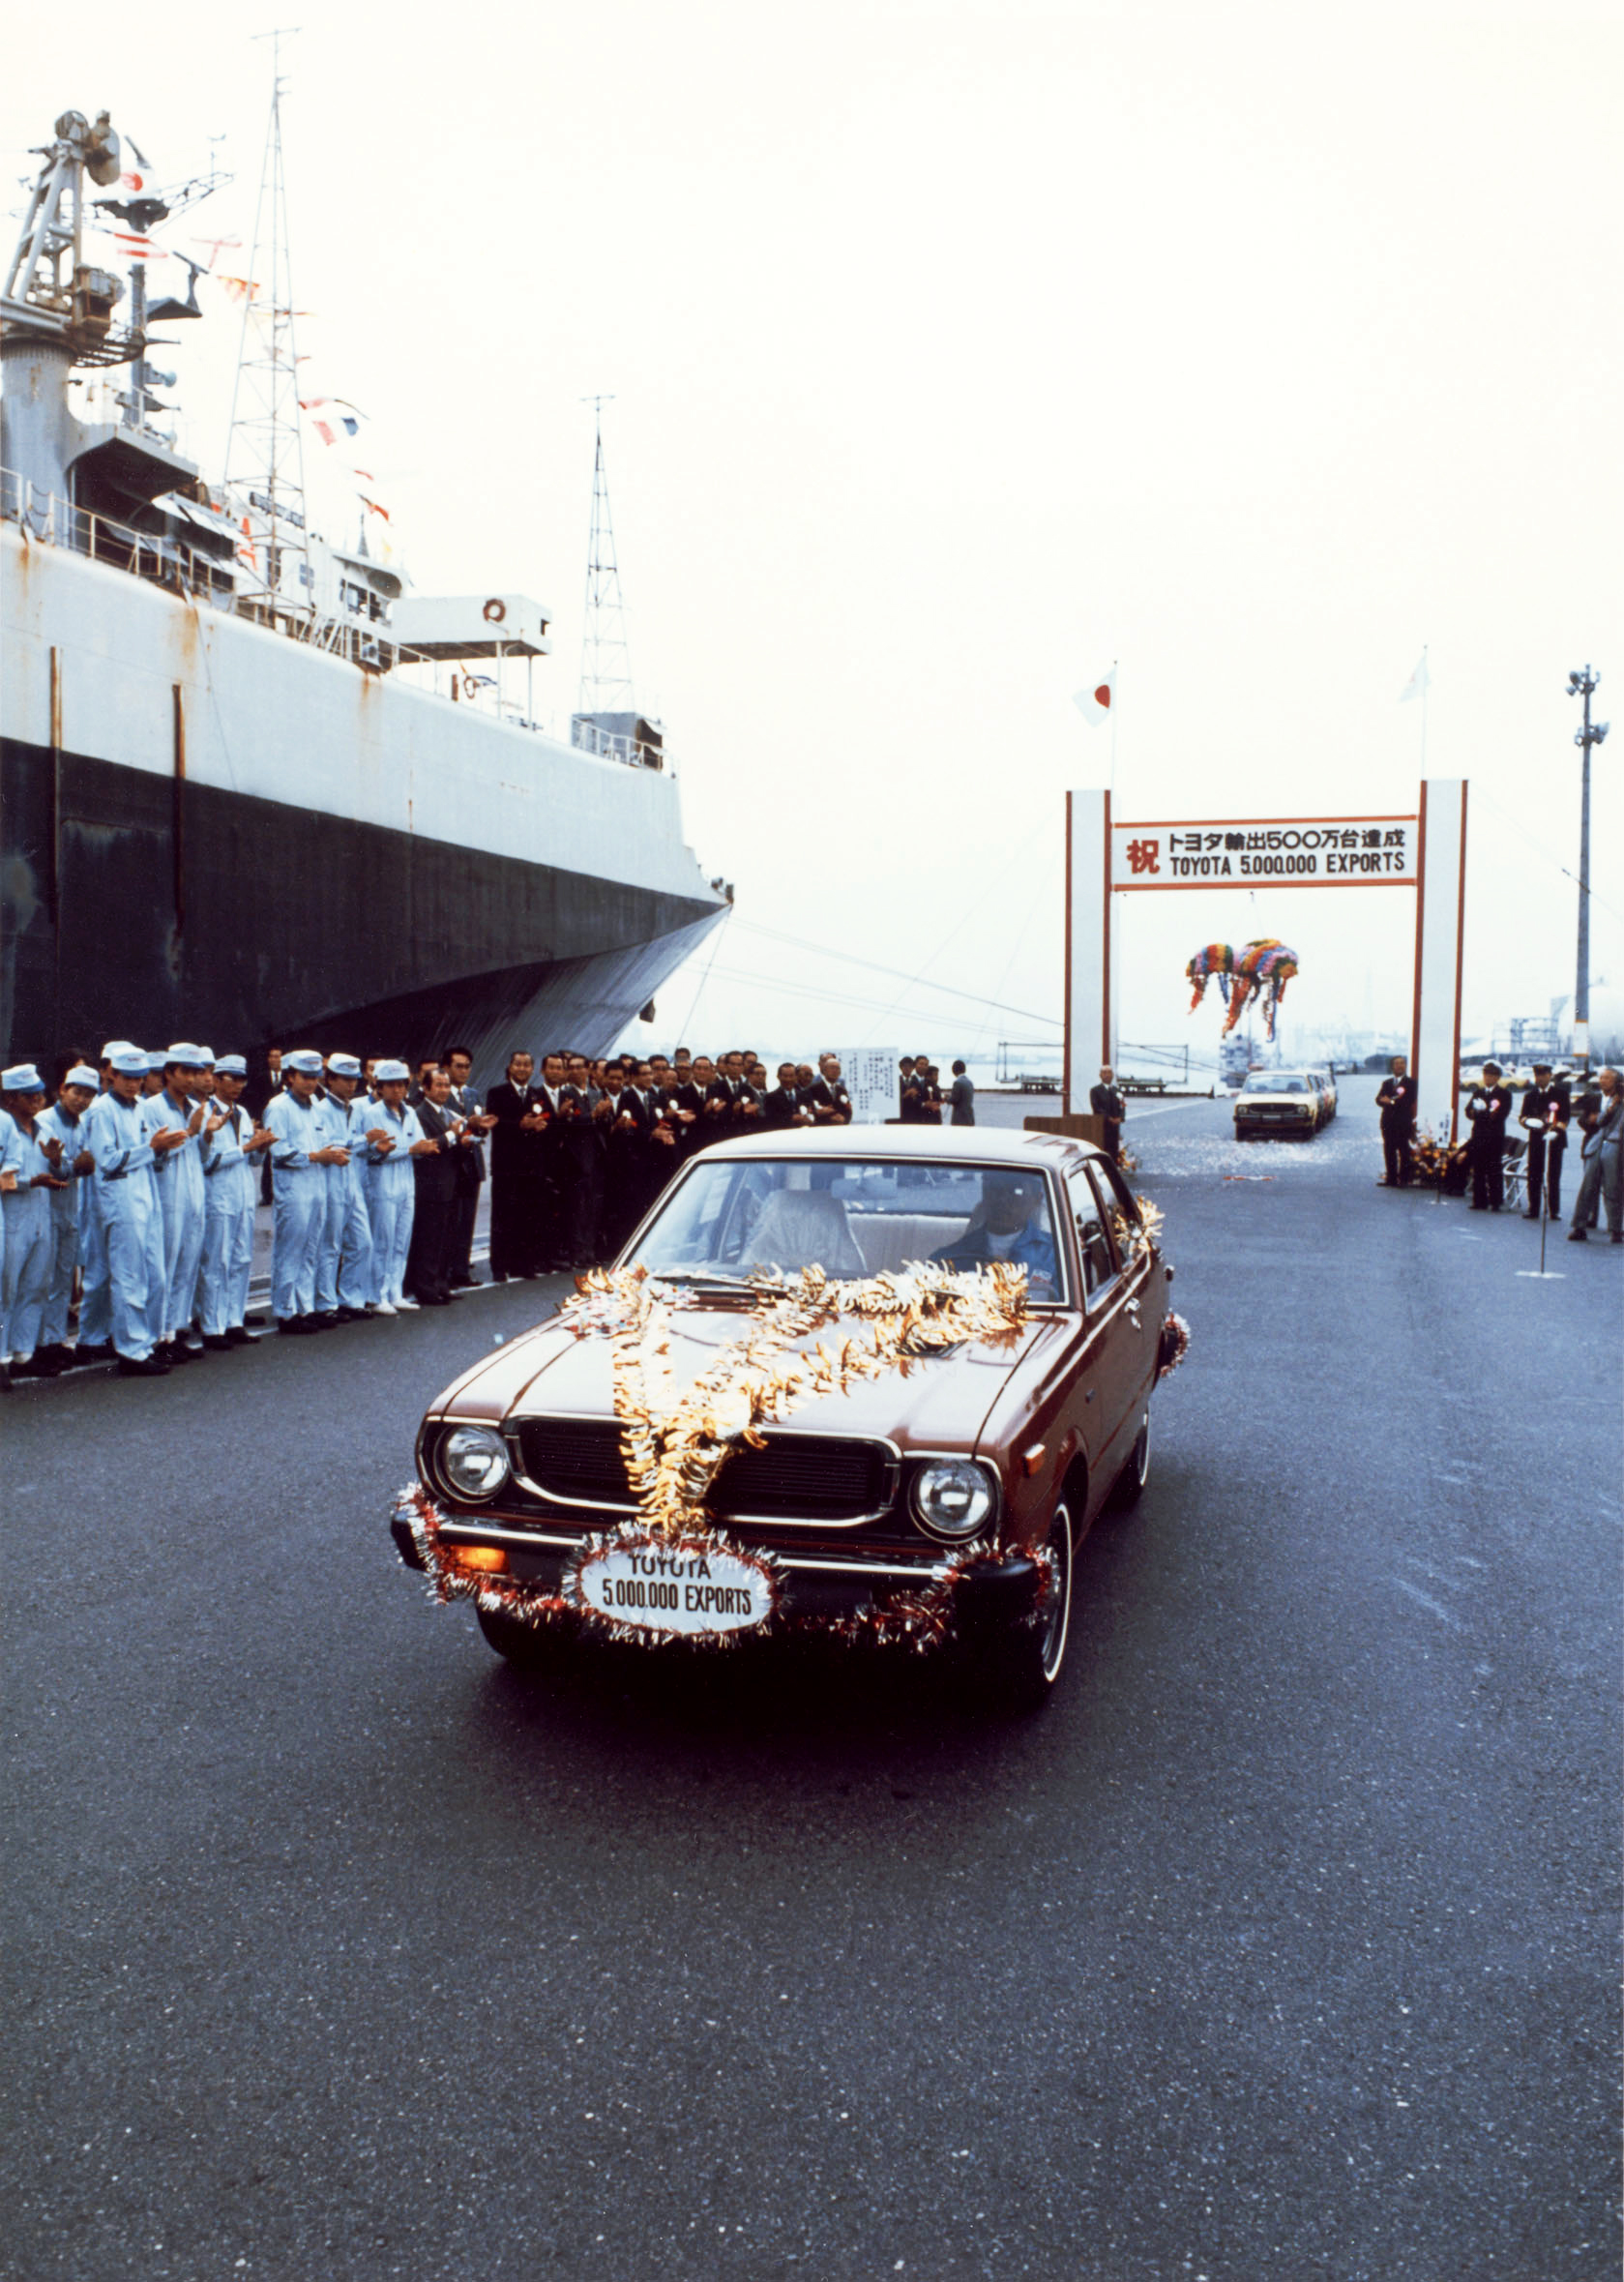 Celebration of the 5 million Corolla exports in 1976